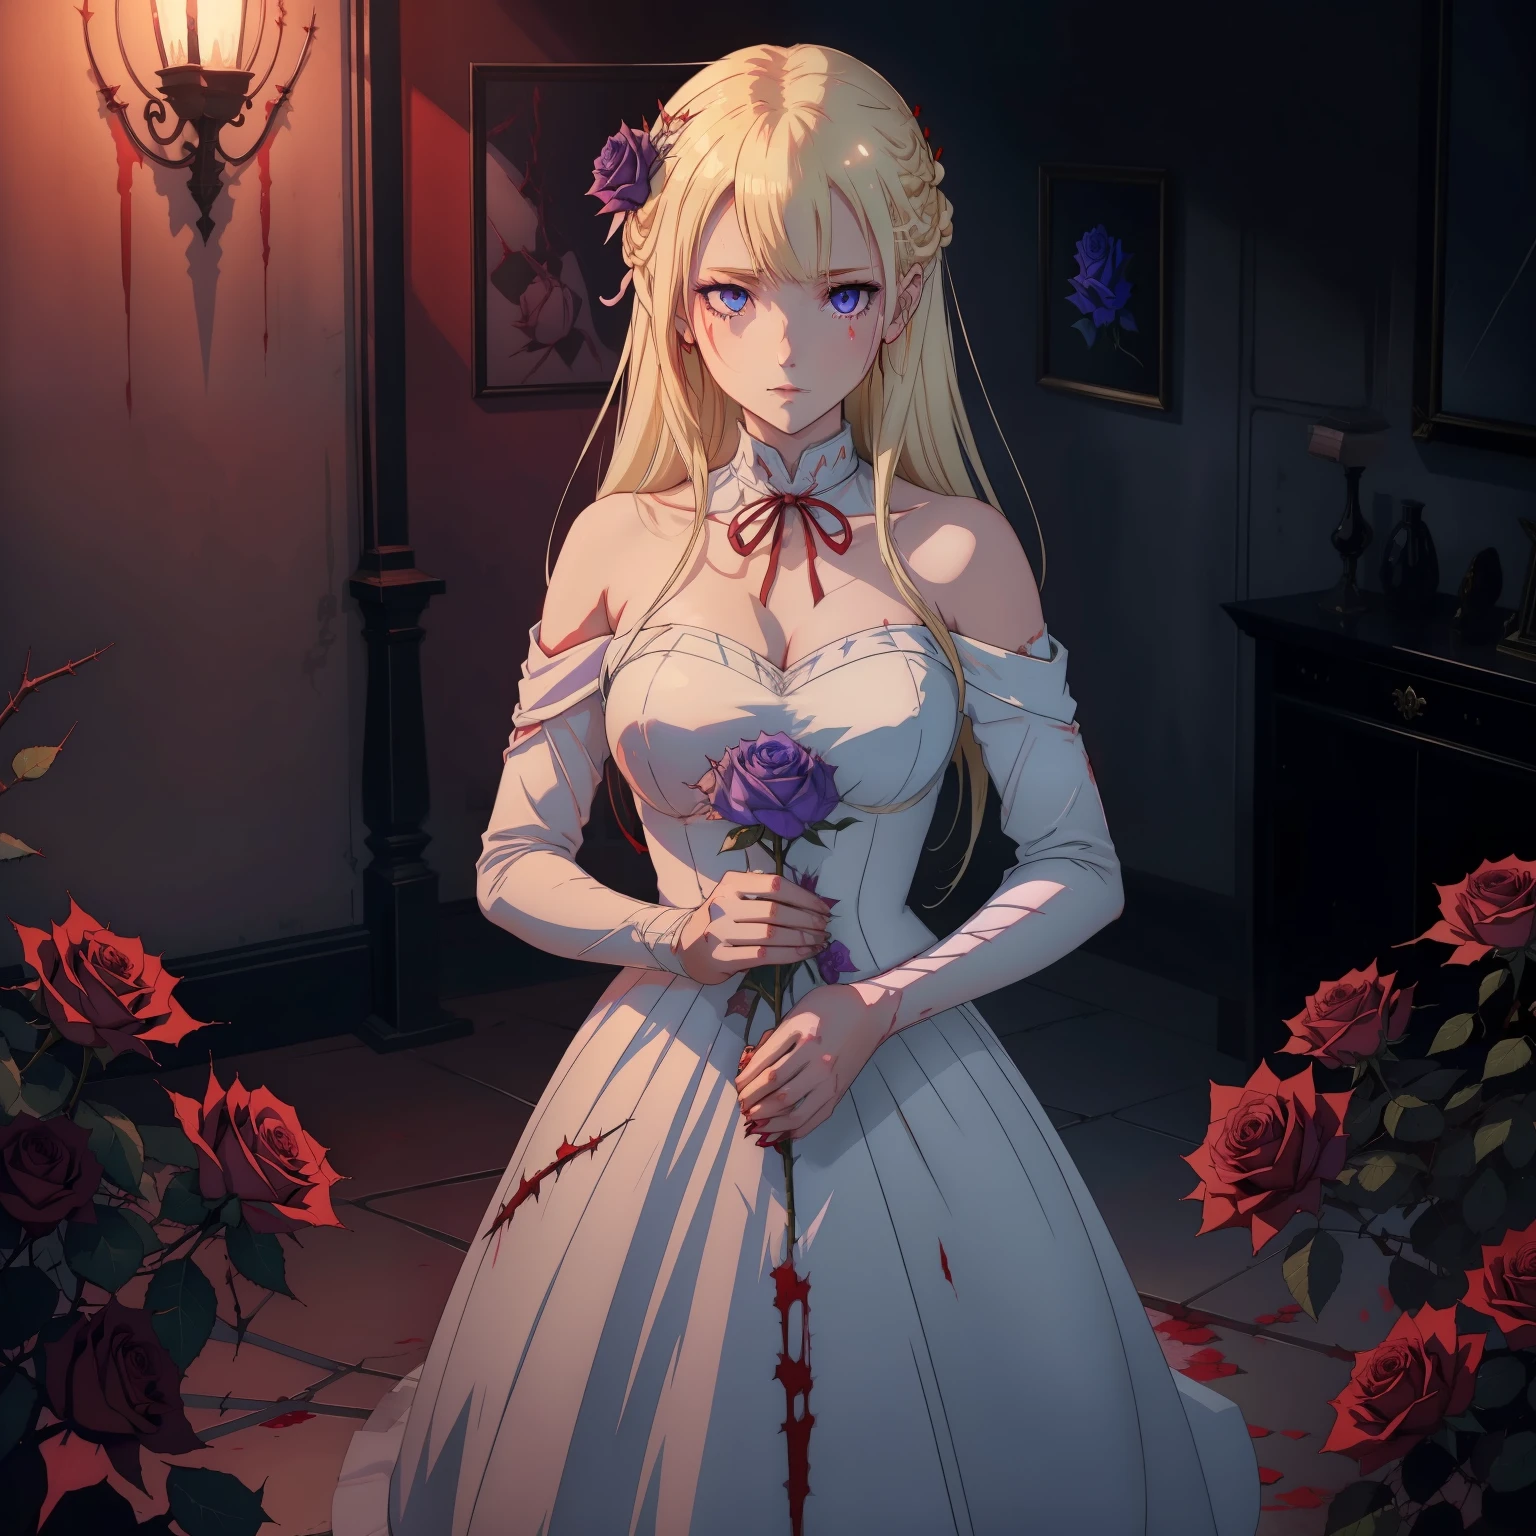 Light blonde haired anime girl with pale bluish violet colored eyes holding a thorny rose, thorns piercing the skin on her hand, bloody hands, blood trickling down her hand as she stands in a dark room with red ribbons alone